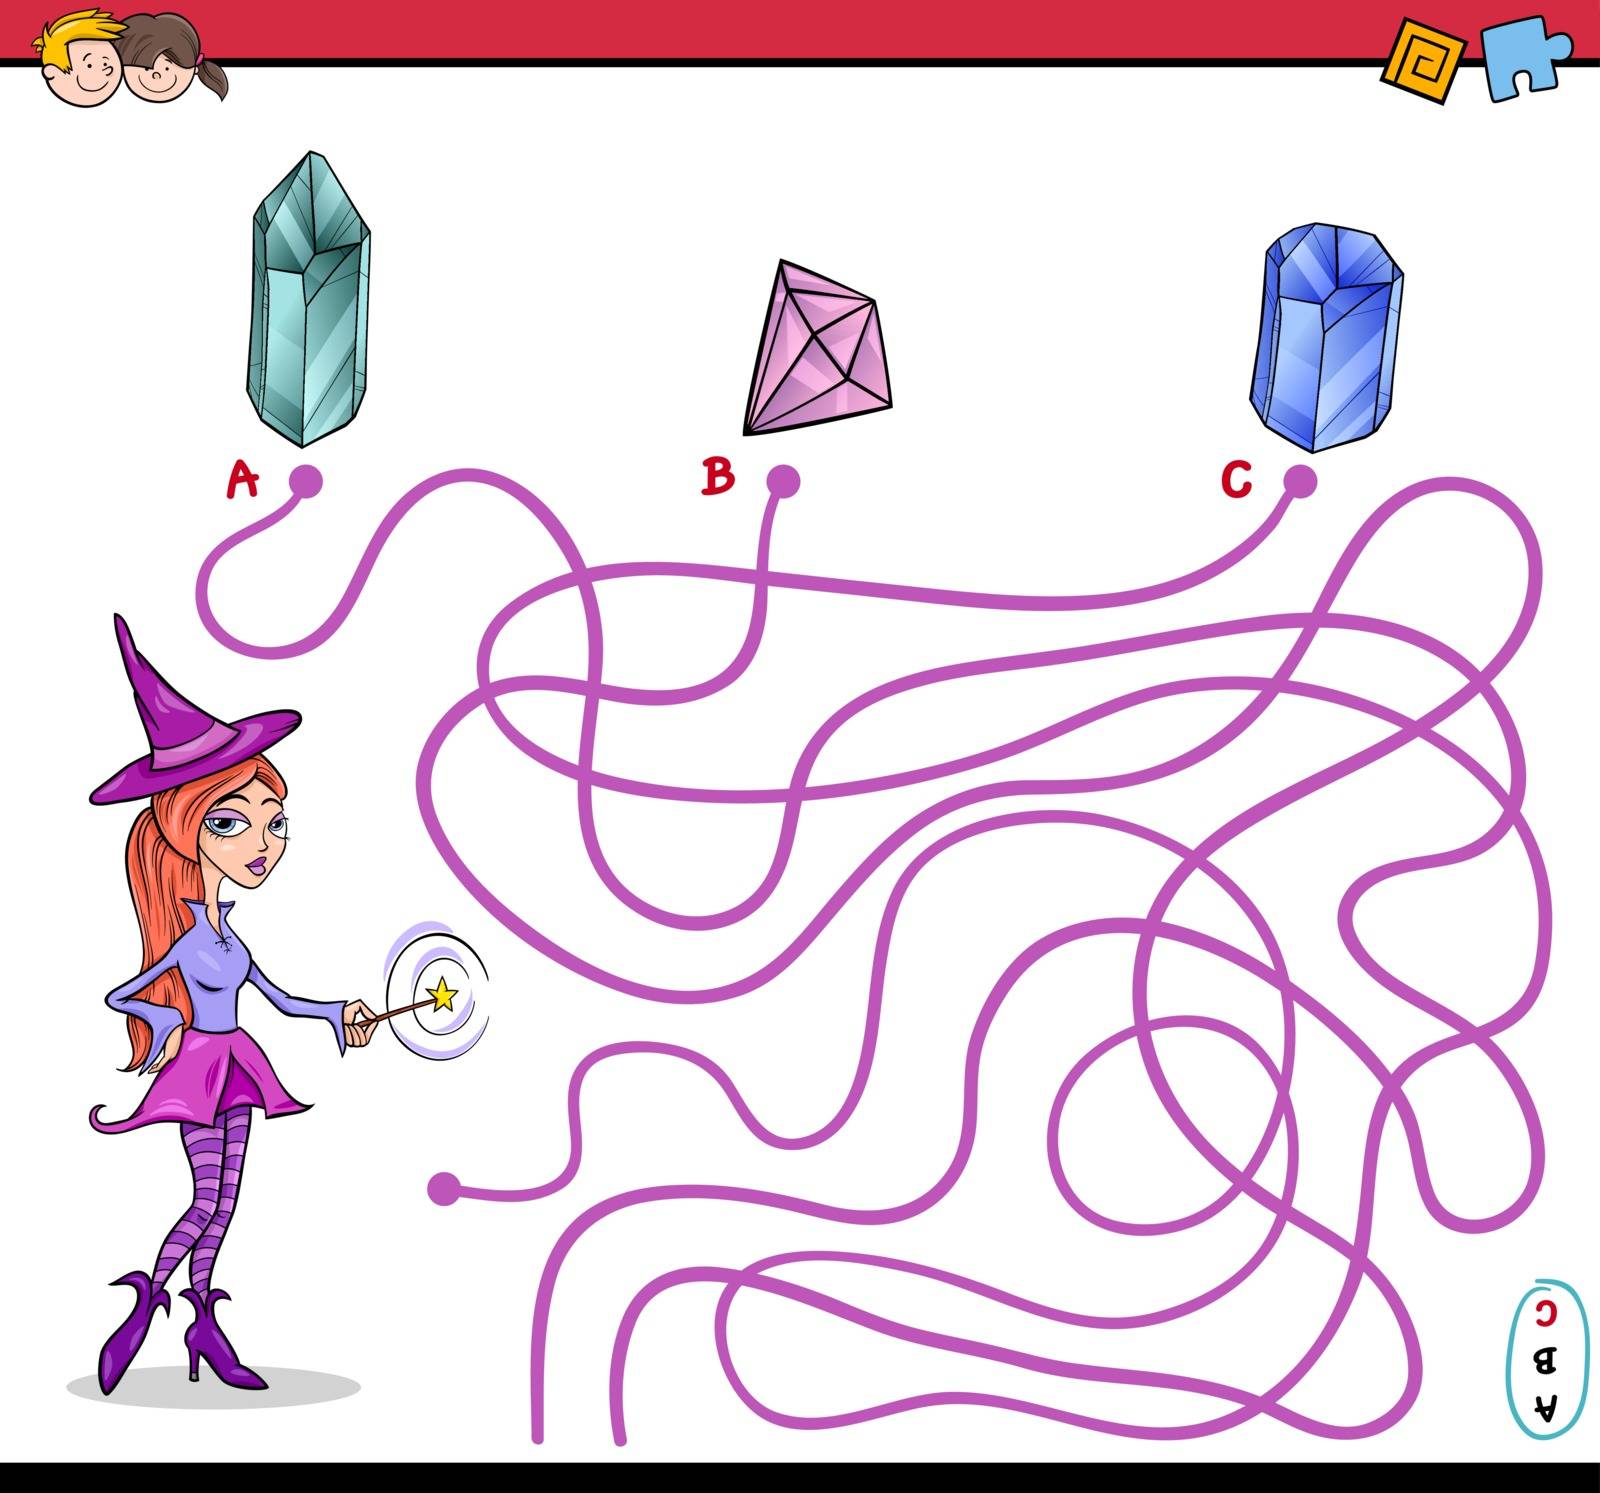 Cartoon Illustration of Educational Paths or Maze Puzzle Activity with Witch Character